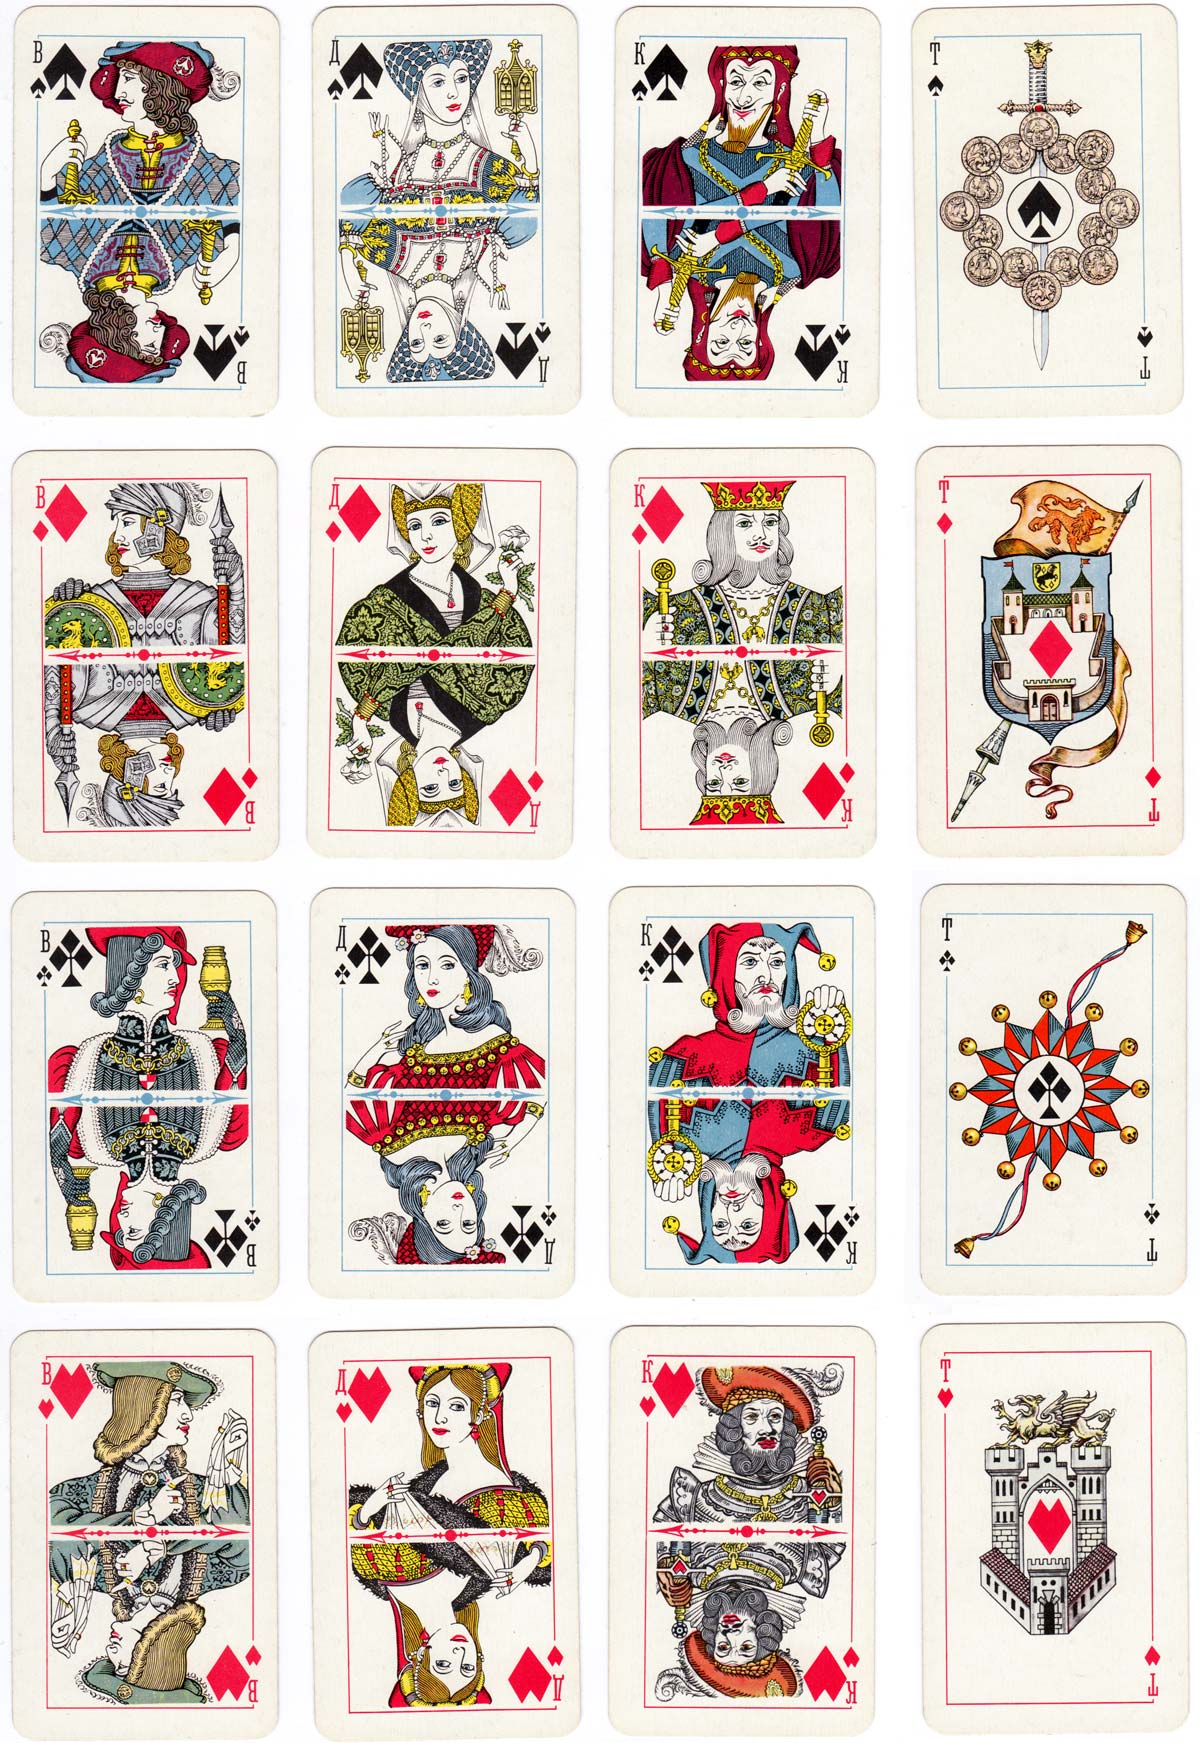 Russian Opera & Theatre Scenes playing cards first published by the Colour Printing Plant (USSR, Russian Federation) in 1974